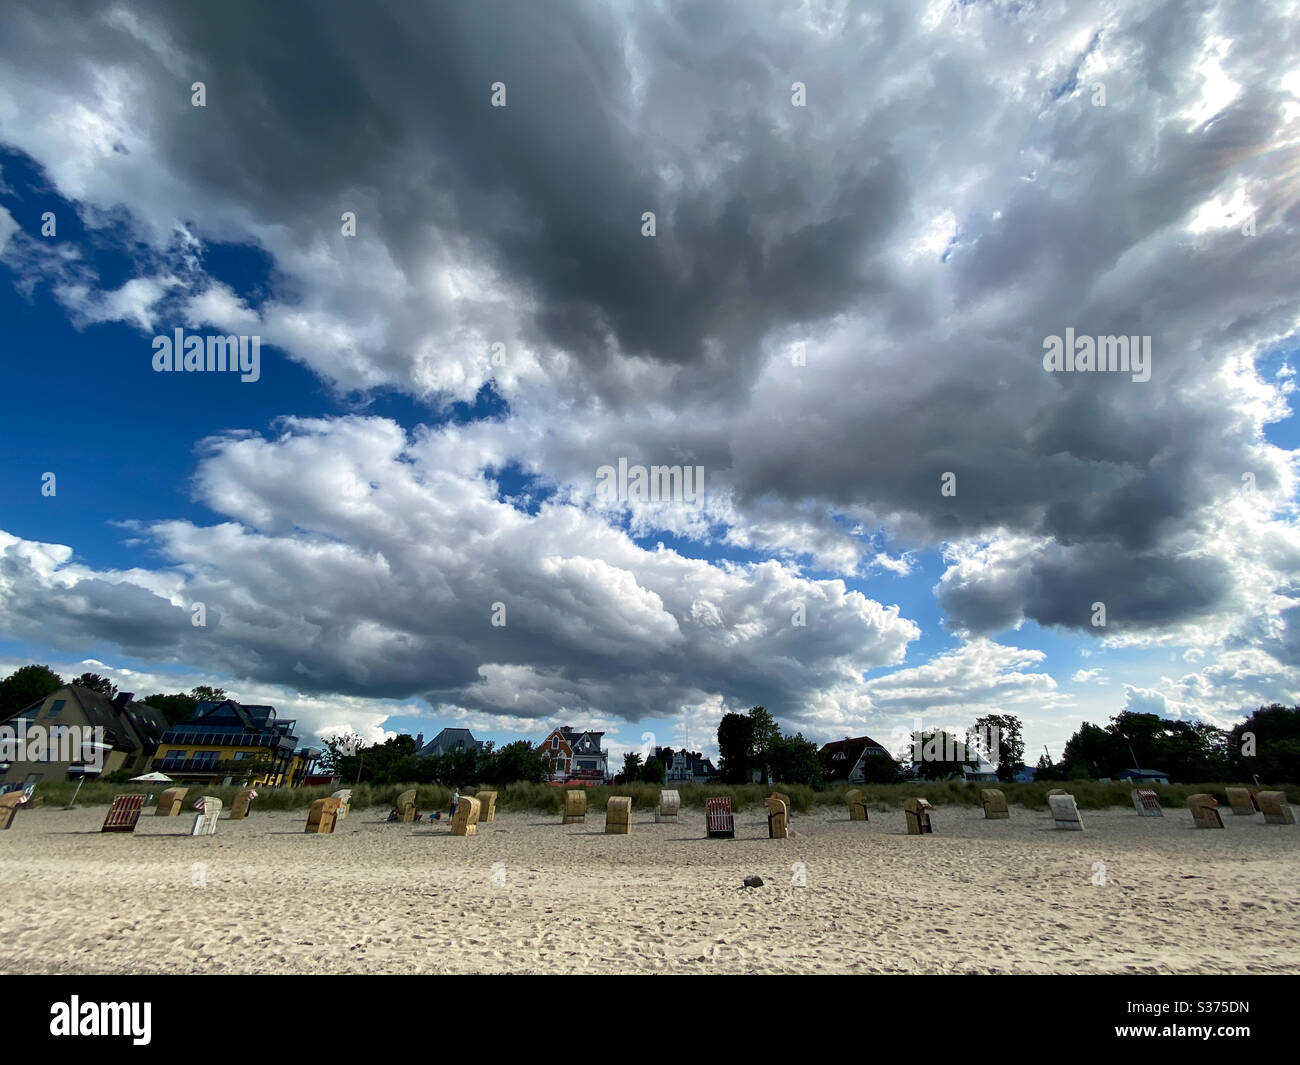 Dramatic sky with the black rain clouds over a beach near Baltic Sea, Germany Stock Photo